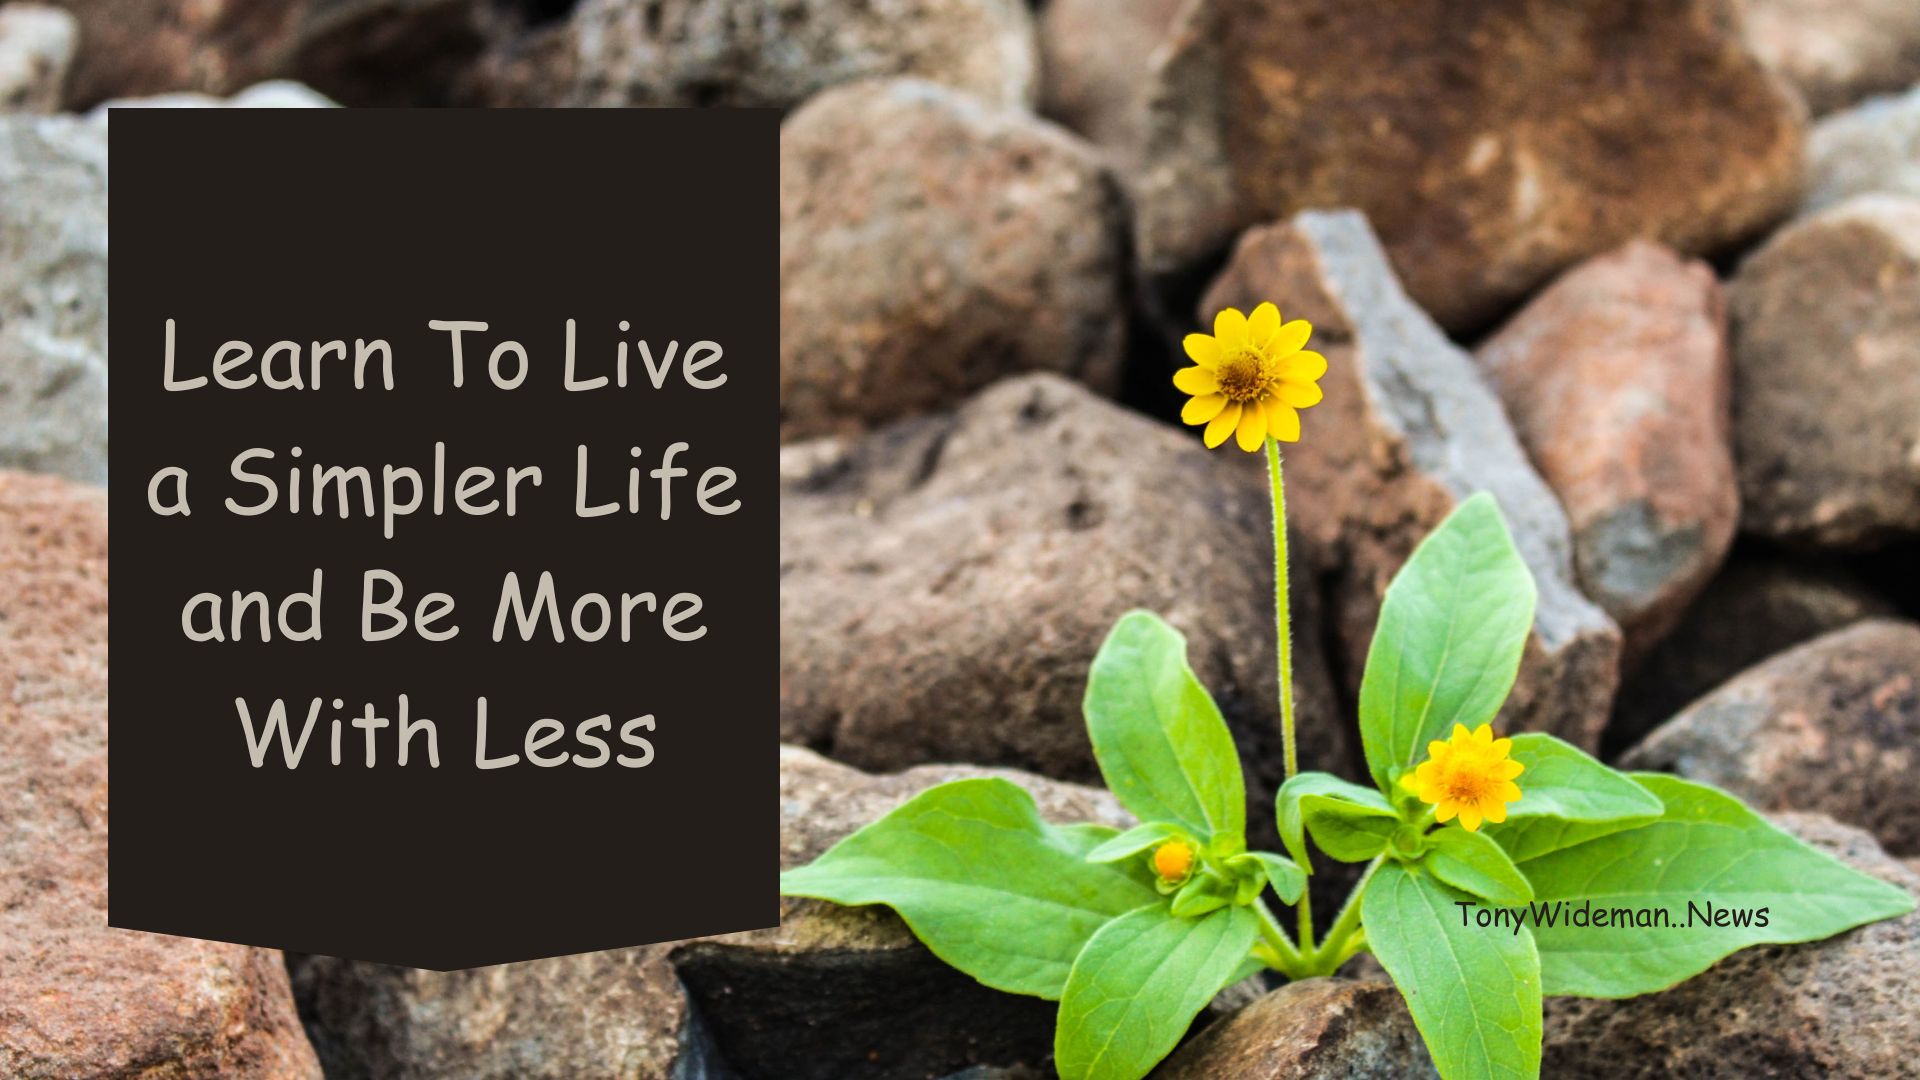 Learn To Live a Simpler Life and Be More With Less